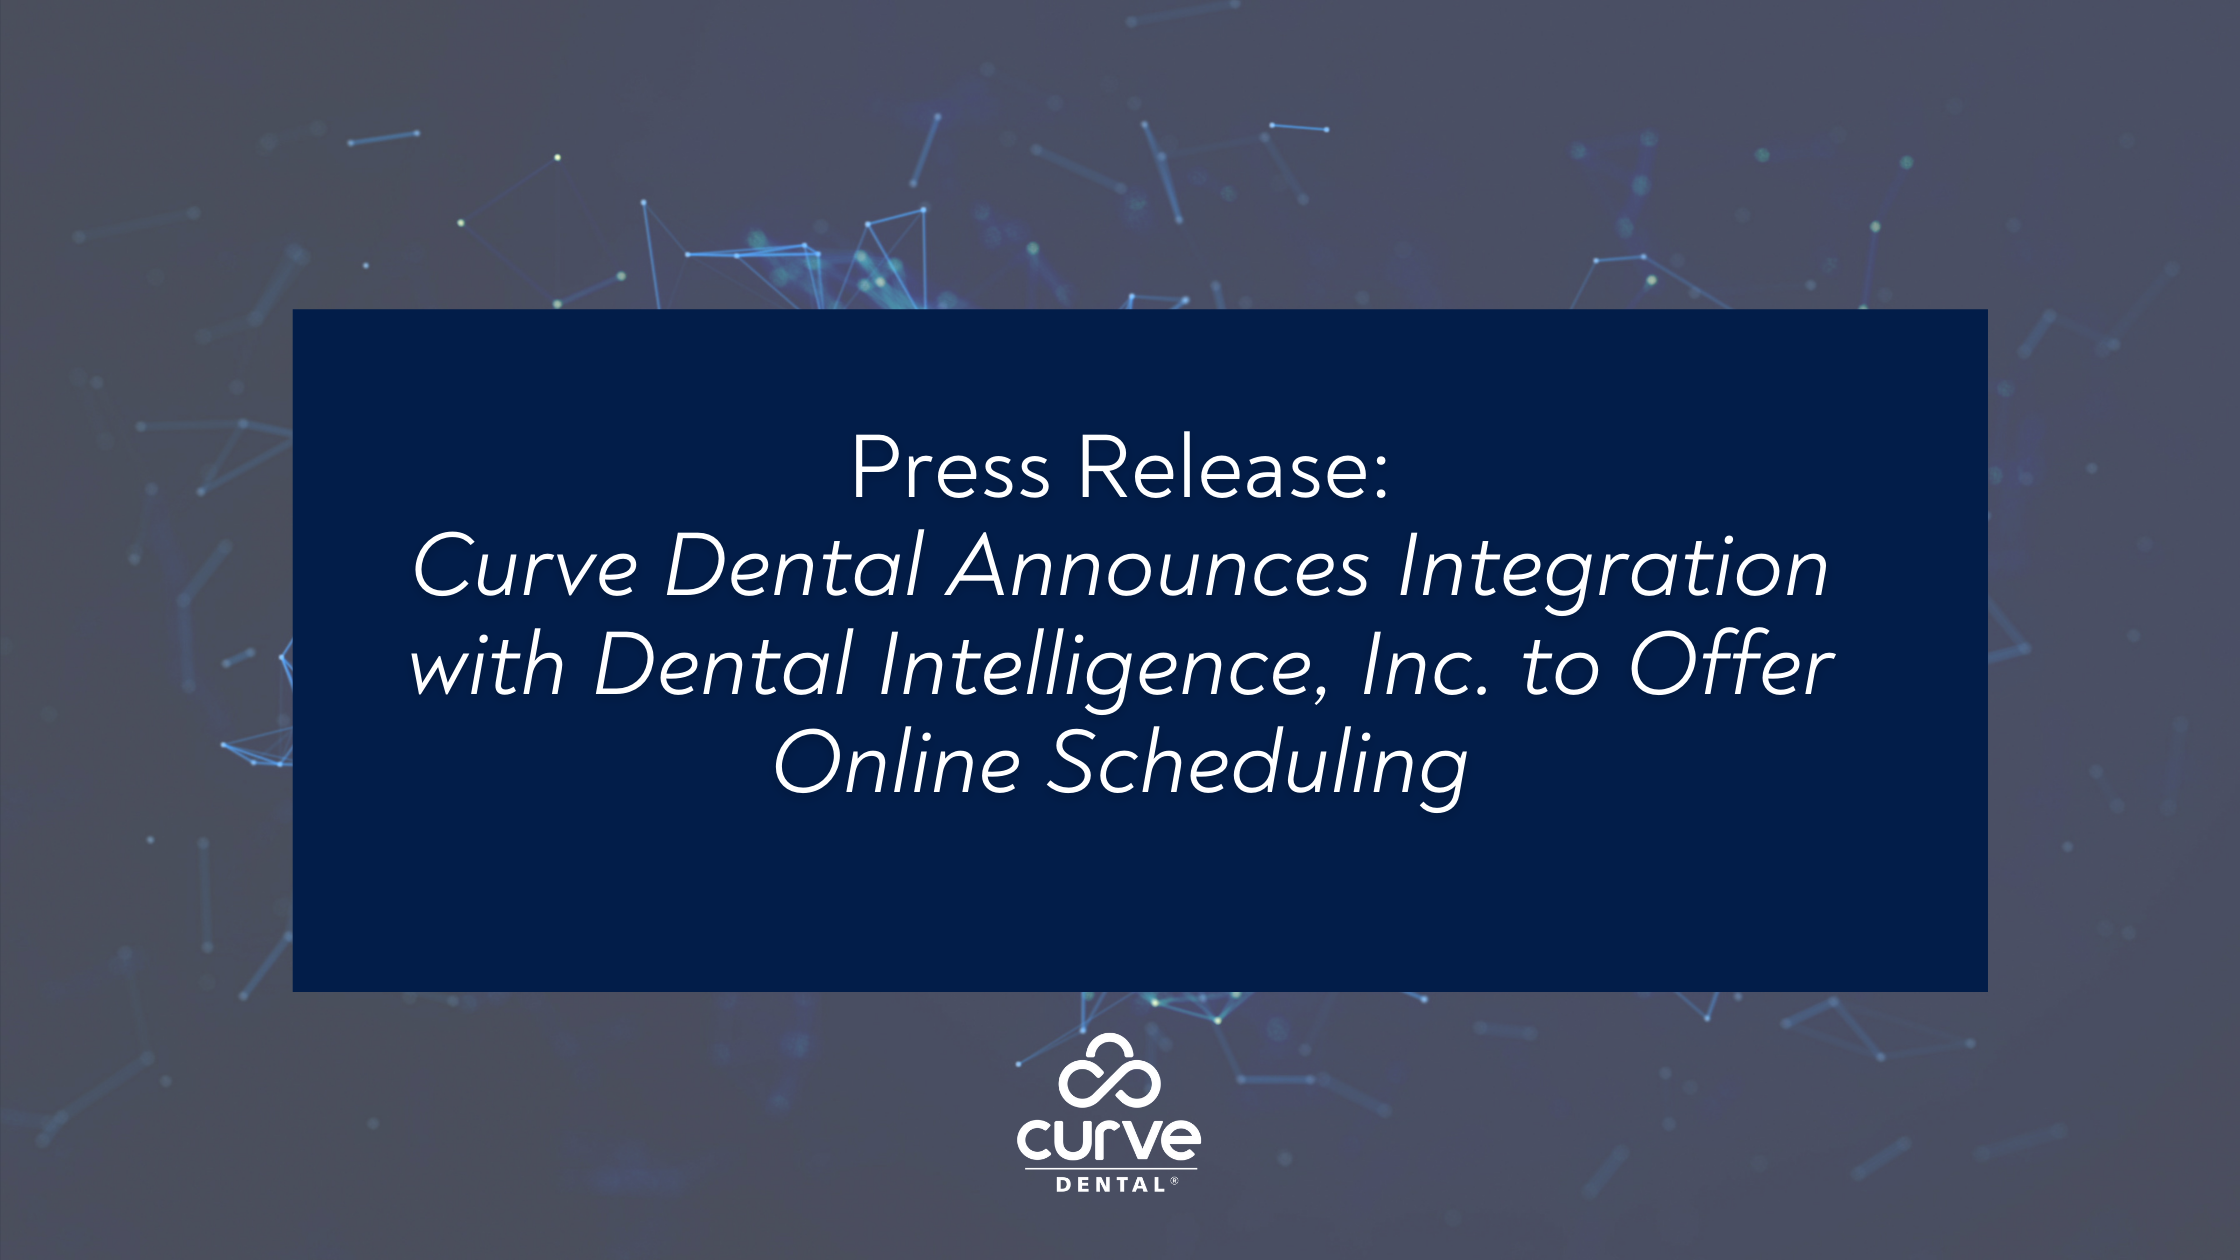 Press Release: Curve Dental Announces Integration with Dental Intelligence, Inc. to Offer Online Scheduling